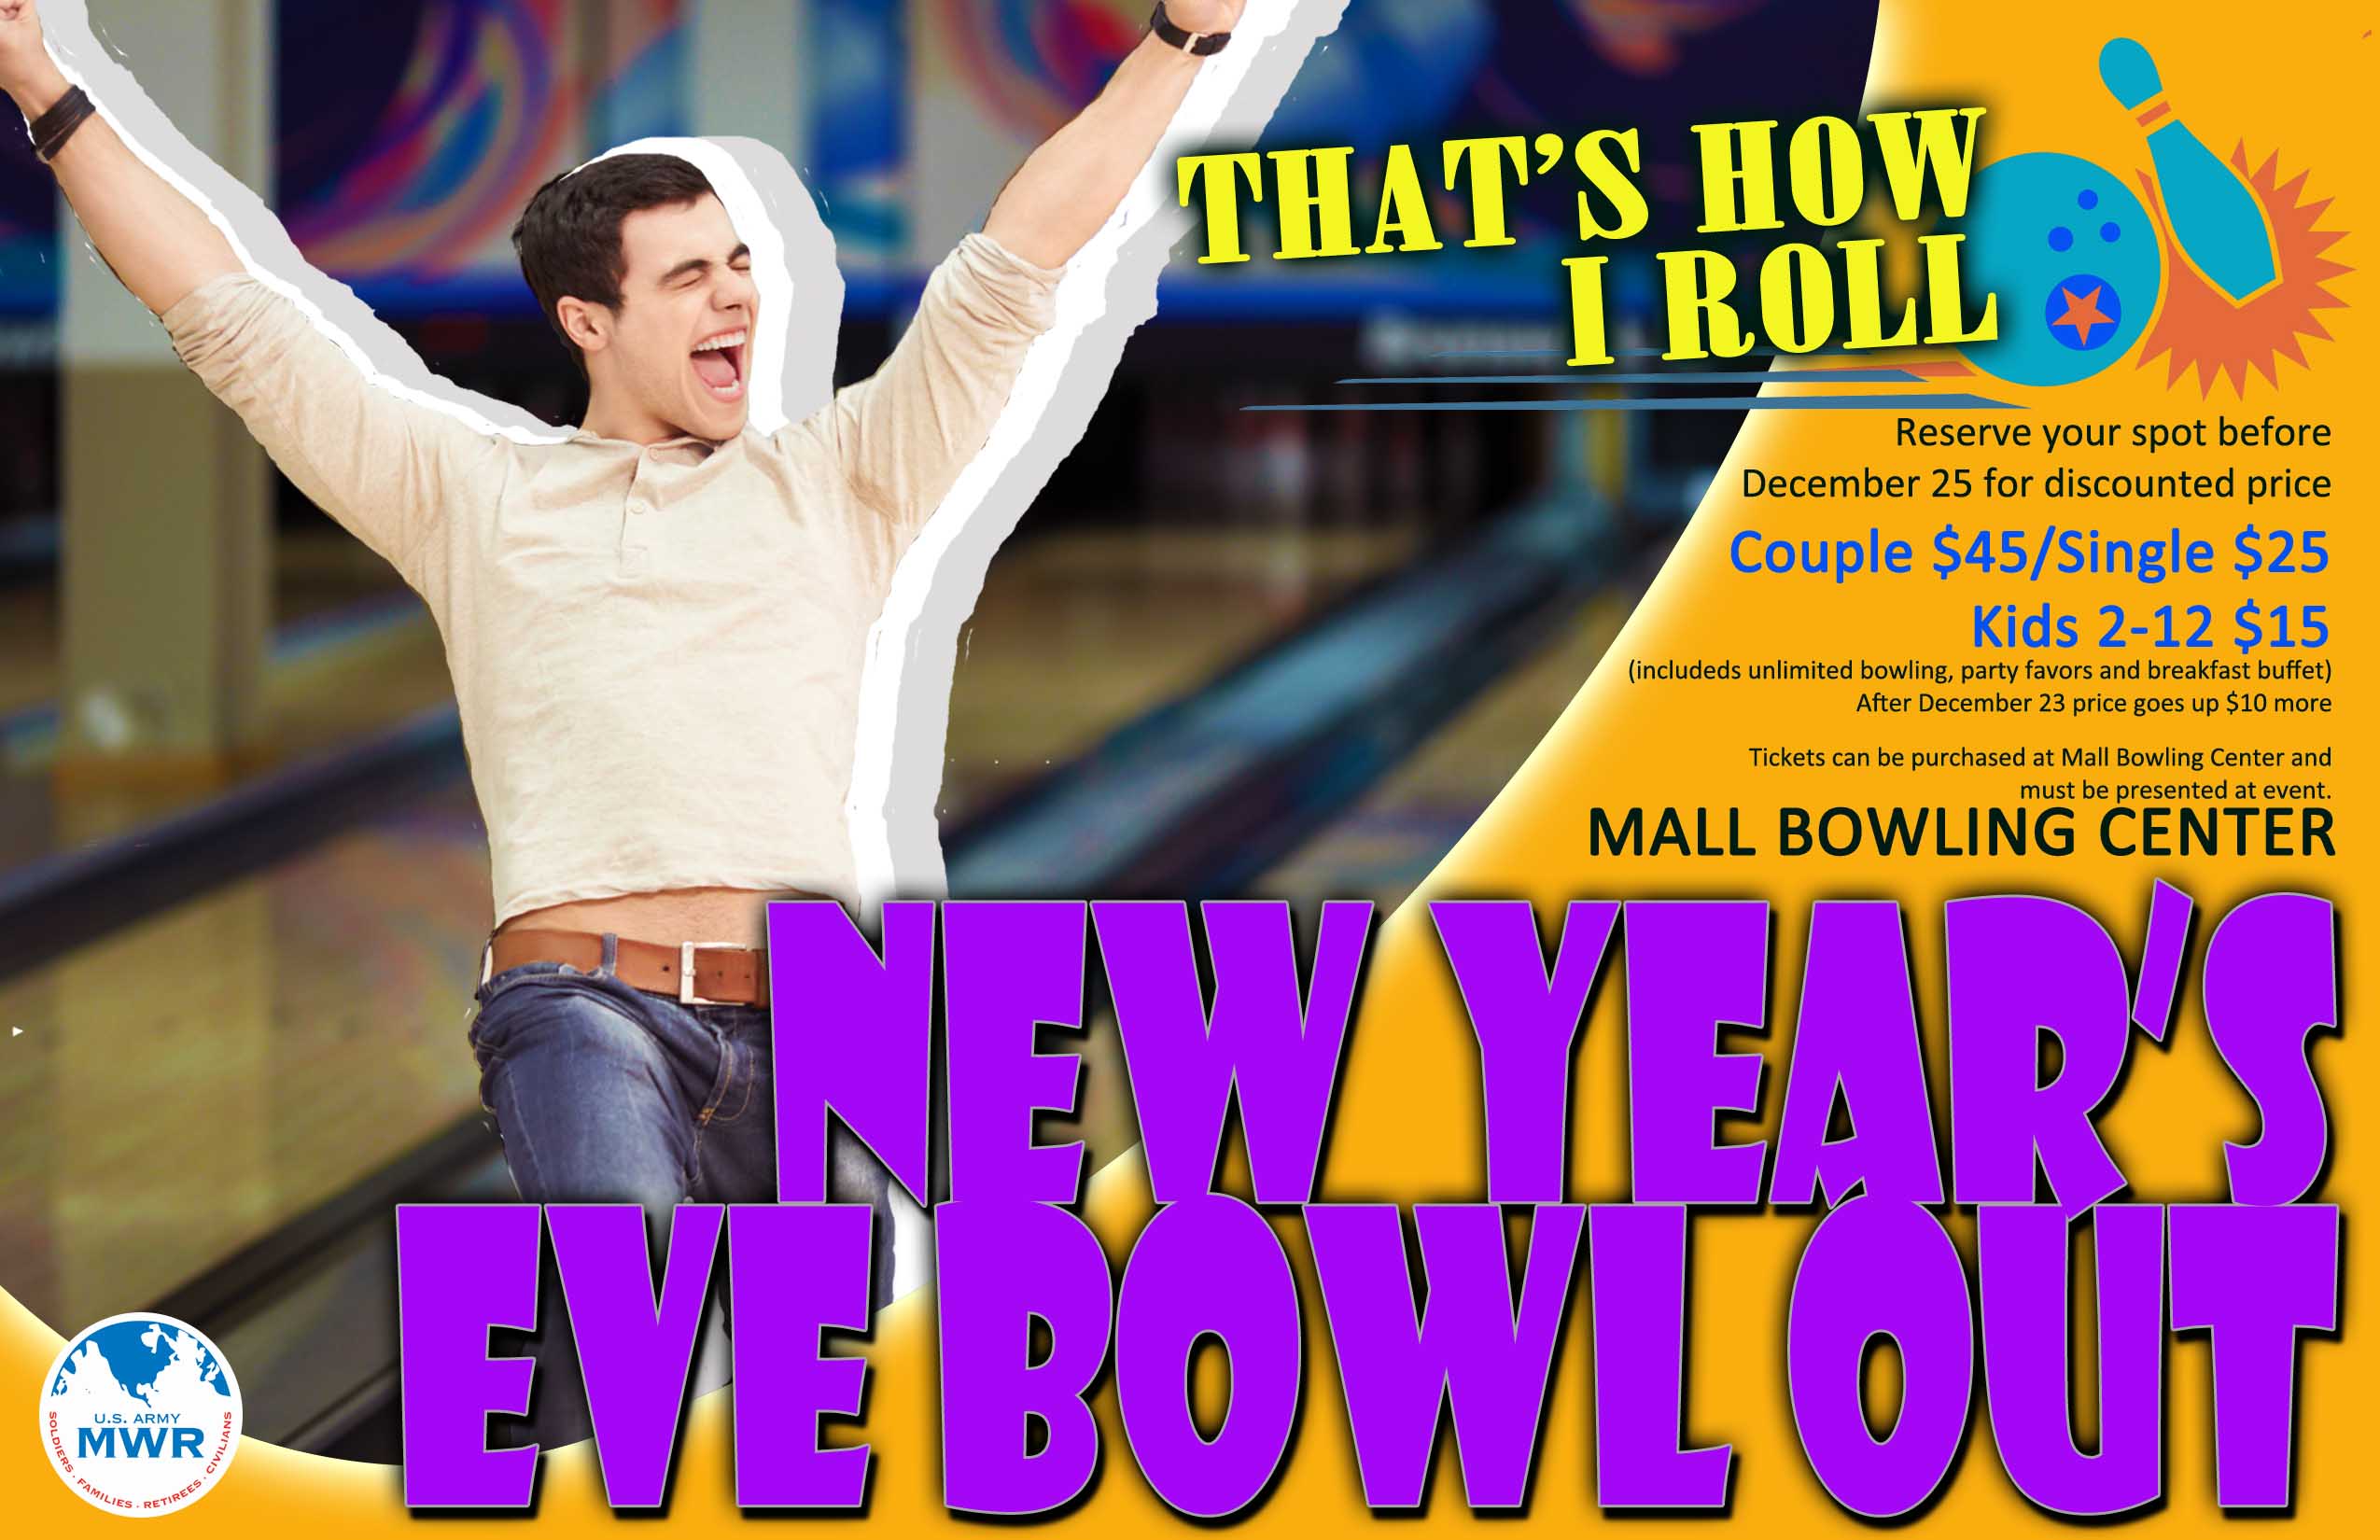 New Year’s Eve Bowl Out Mall Bowling Center